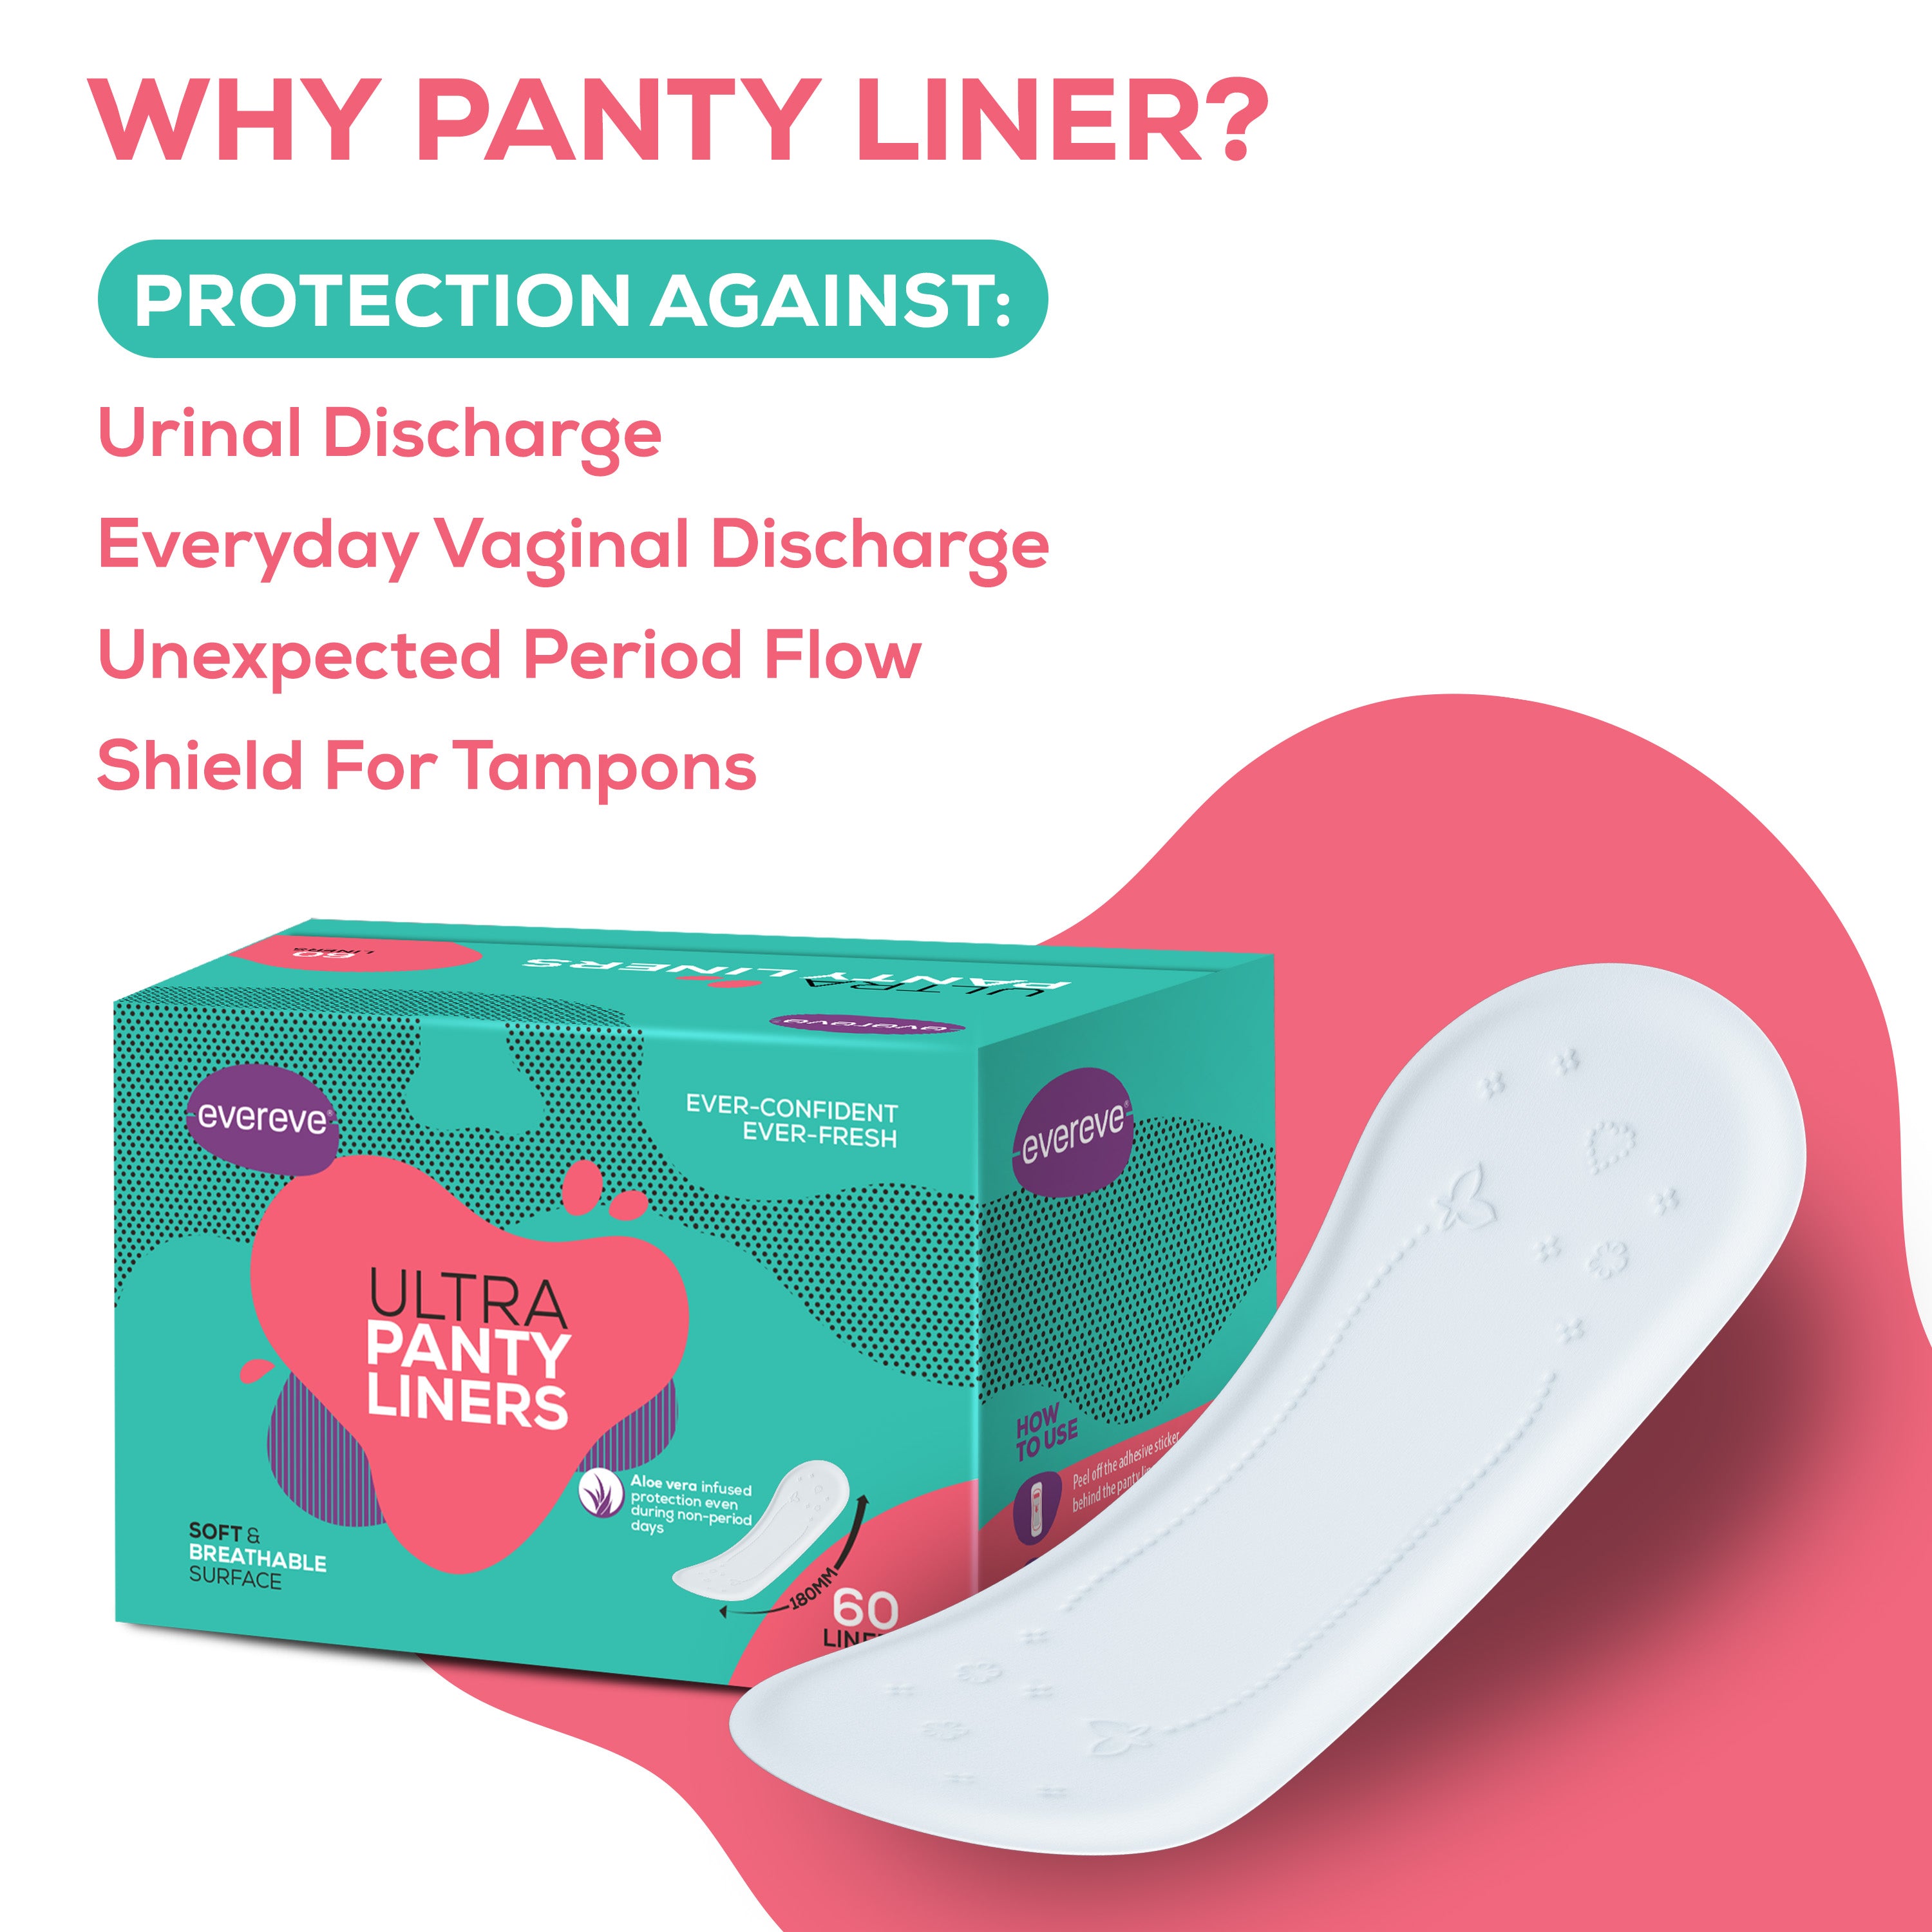 Period Care, EverEve Ultra Absorbent, Heavy Flow Disposable Period Panties  for Sanitary Protection, L-XL (5 Pcs)